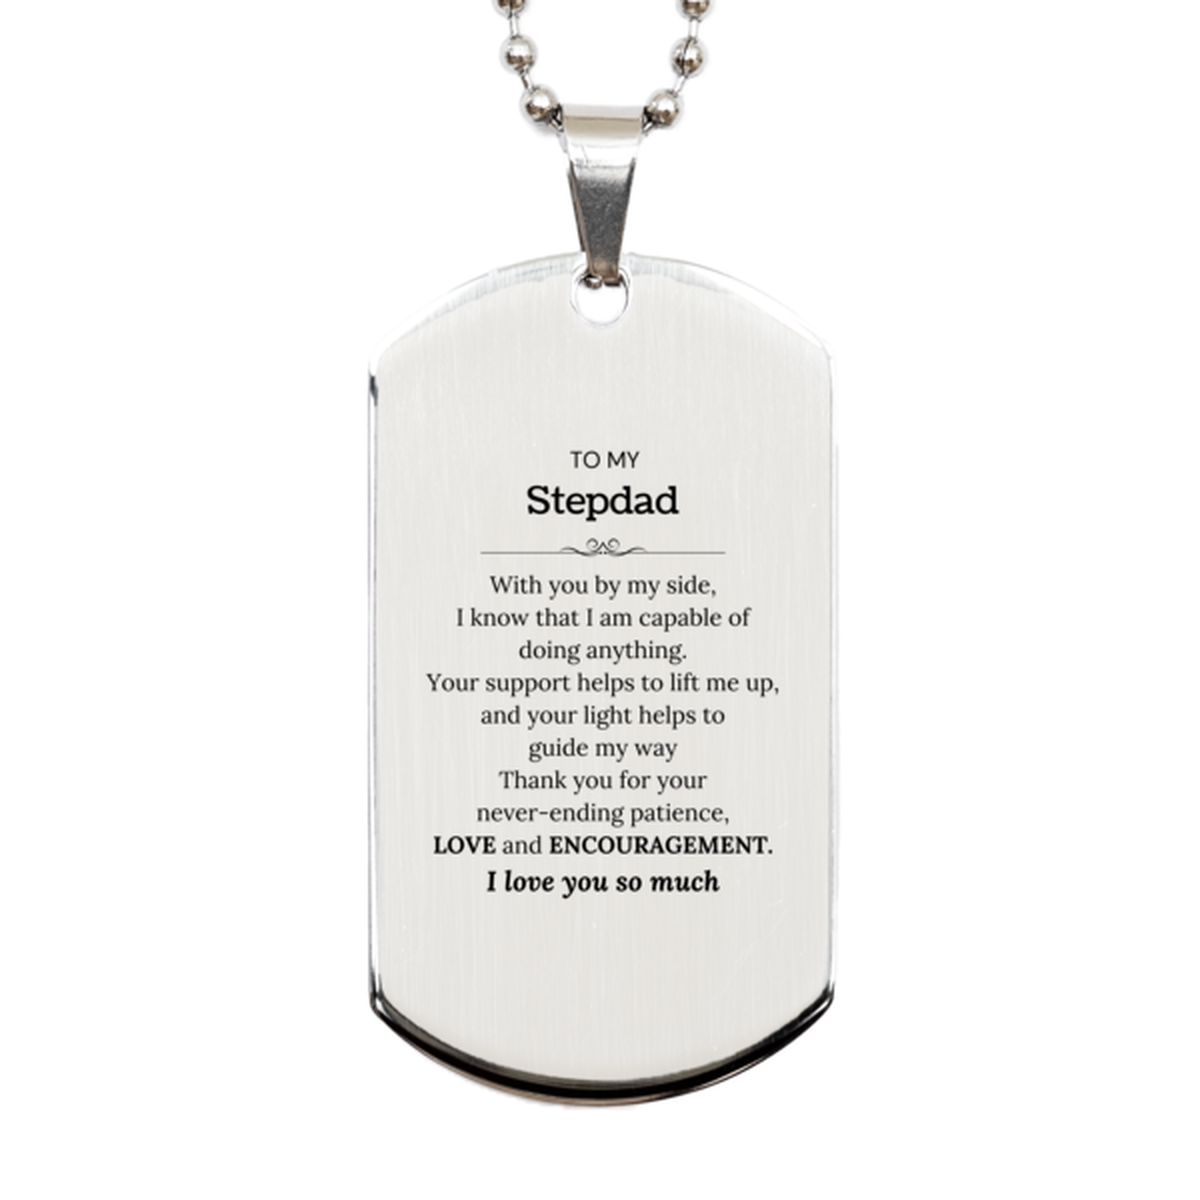 Appreciation Stepdad Silver Dog Tag Gifts, To My Stepdad Birthday Christmas Wedding Keepsake Gifts for Stepdad With you by my side, I know that I am capable of doing anything. I love you so much